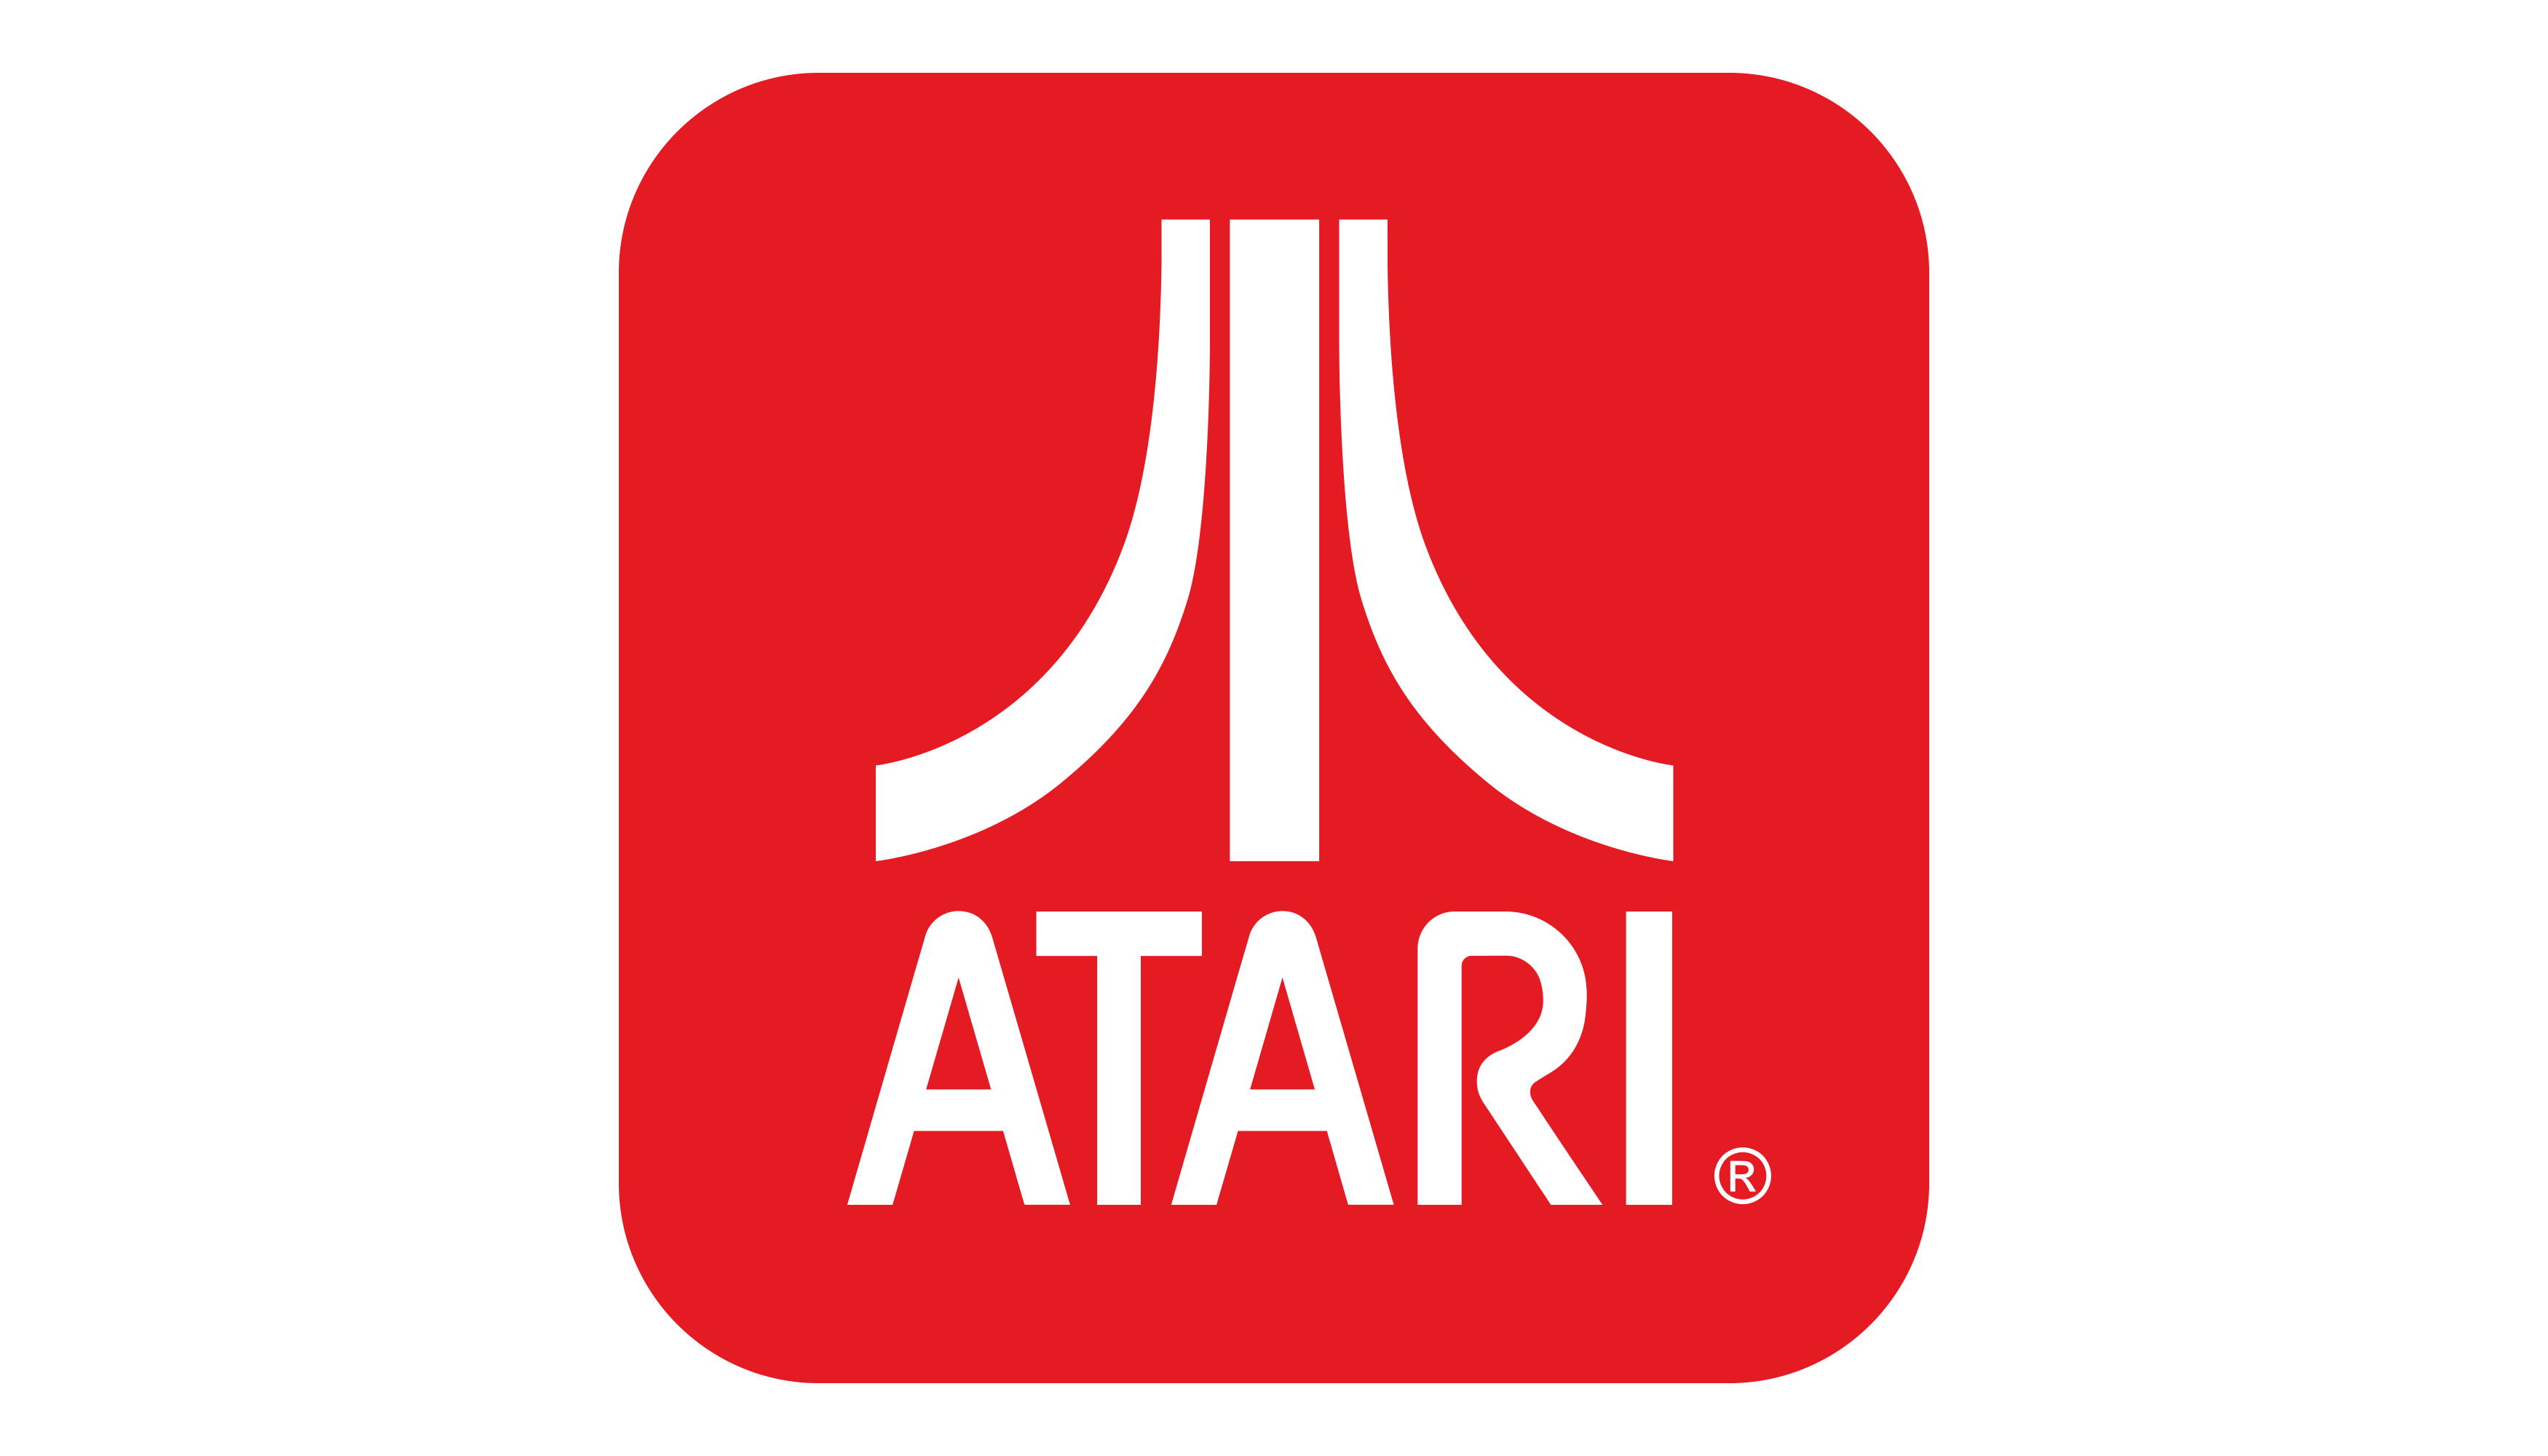 Atari® Announces Official Debut of the BLADE RUNNER 2049 Limited-Edition Atari Speakerhat and Other Designs, Launches Speakerhat Store